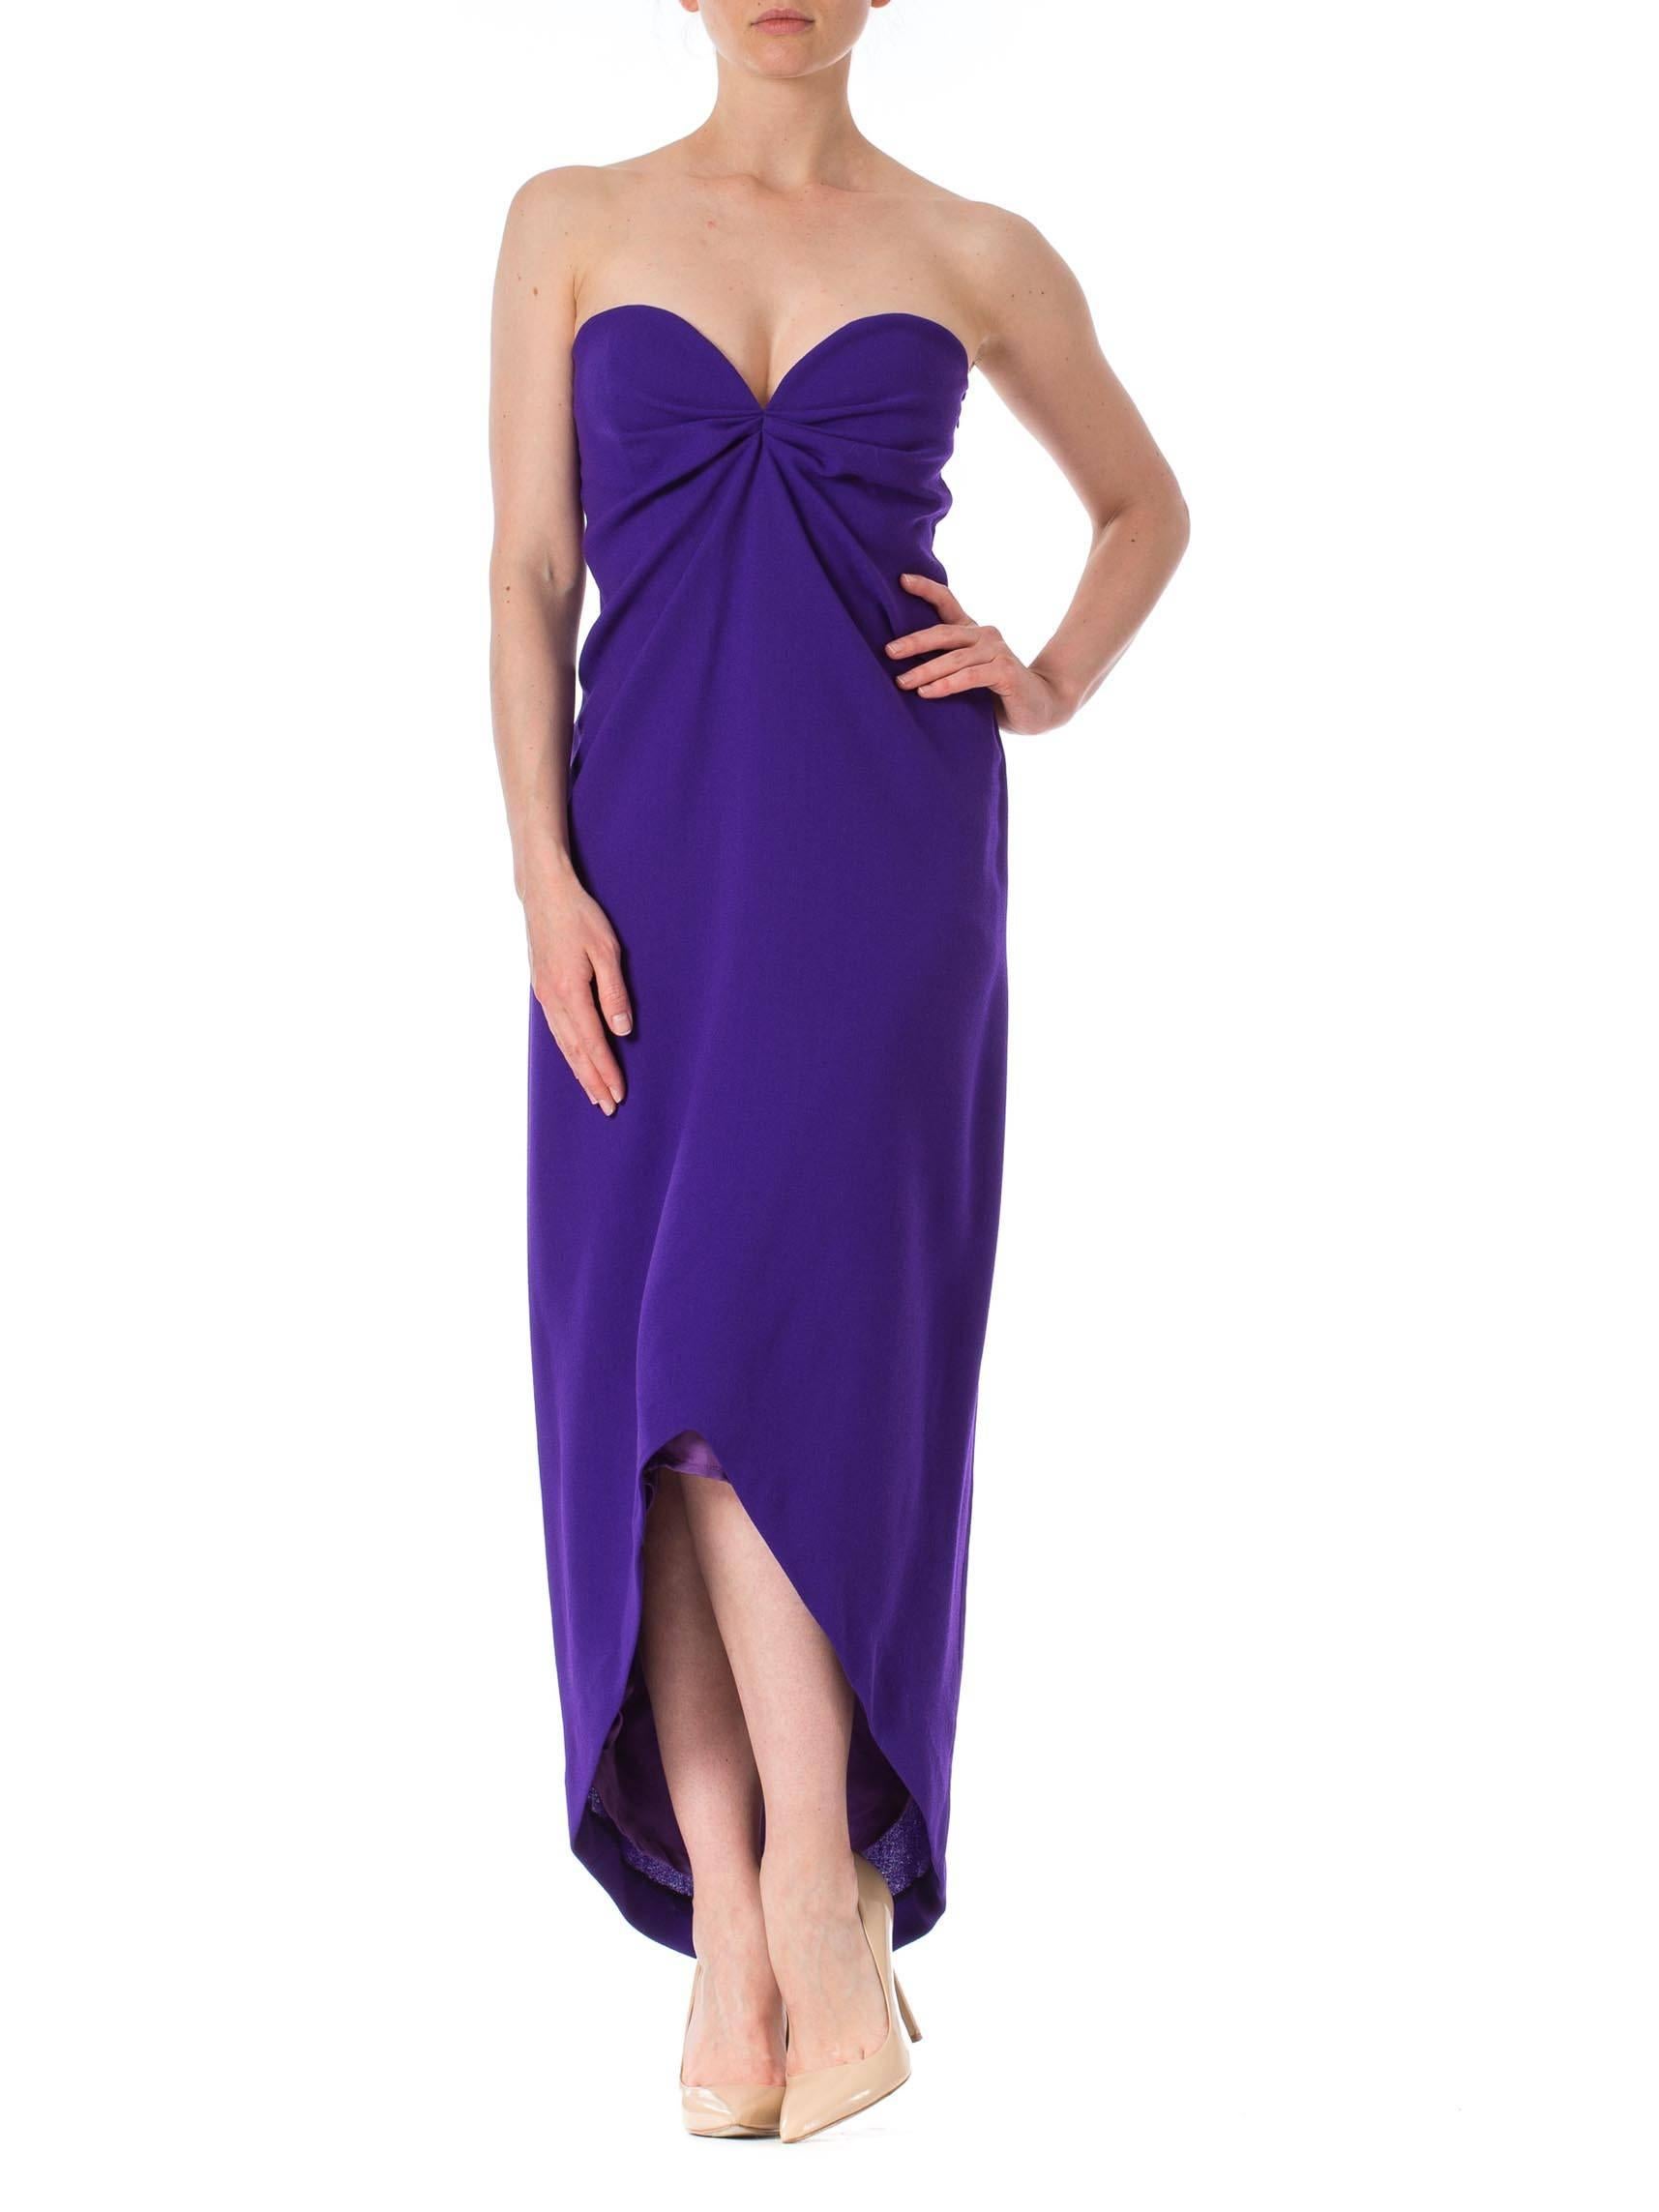 Gorgeous crepe dress built with an inner bodice and waist stay to keep the dress in place. This is a boldly hued strapless dress from Yves Saint Laurent's 'Variation' line. Made in 100% virgin wool, it is a striking shade of royal purple. The